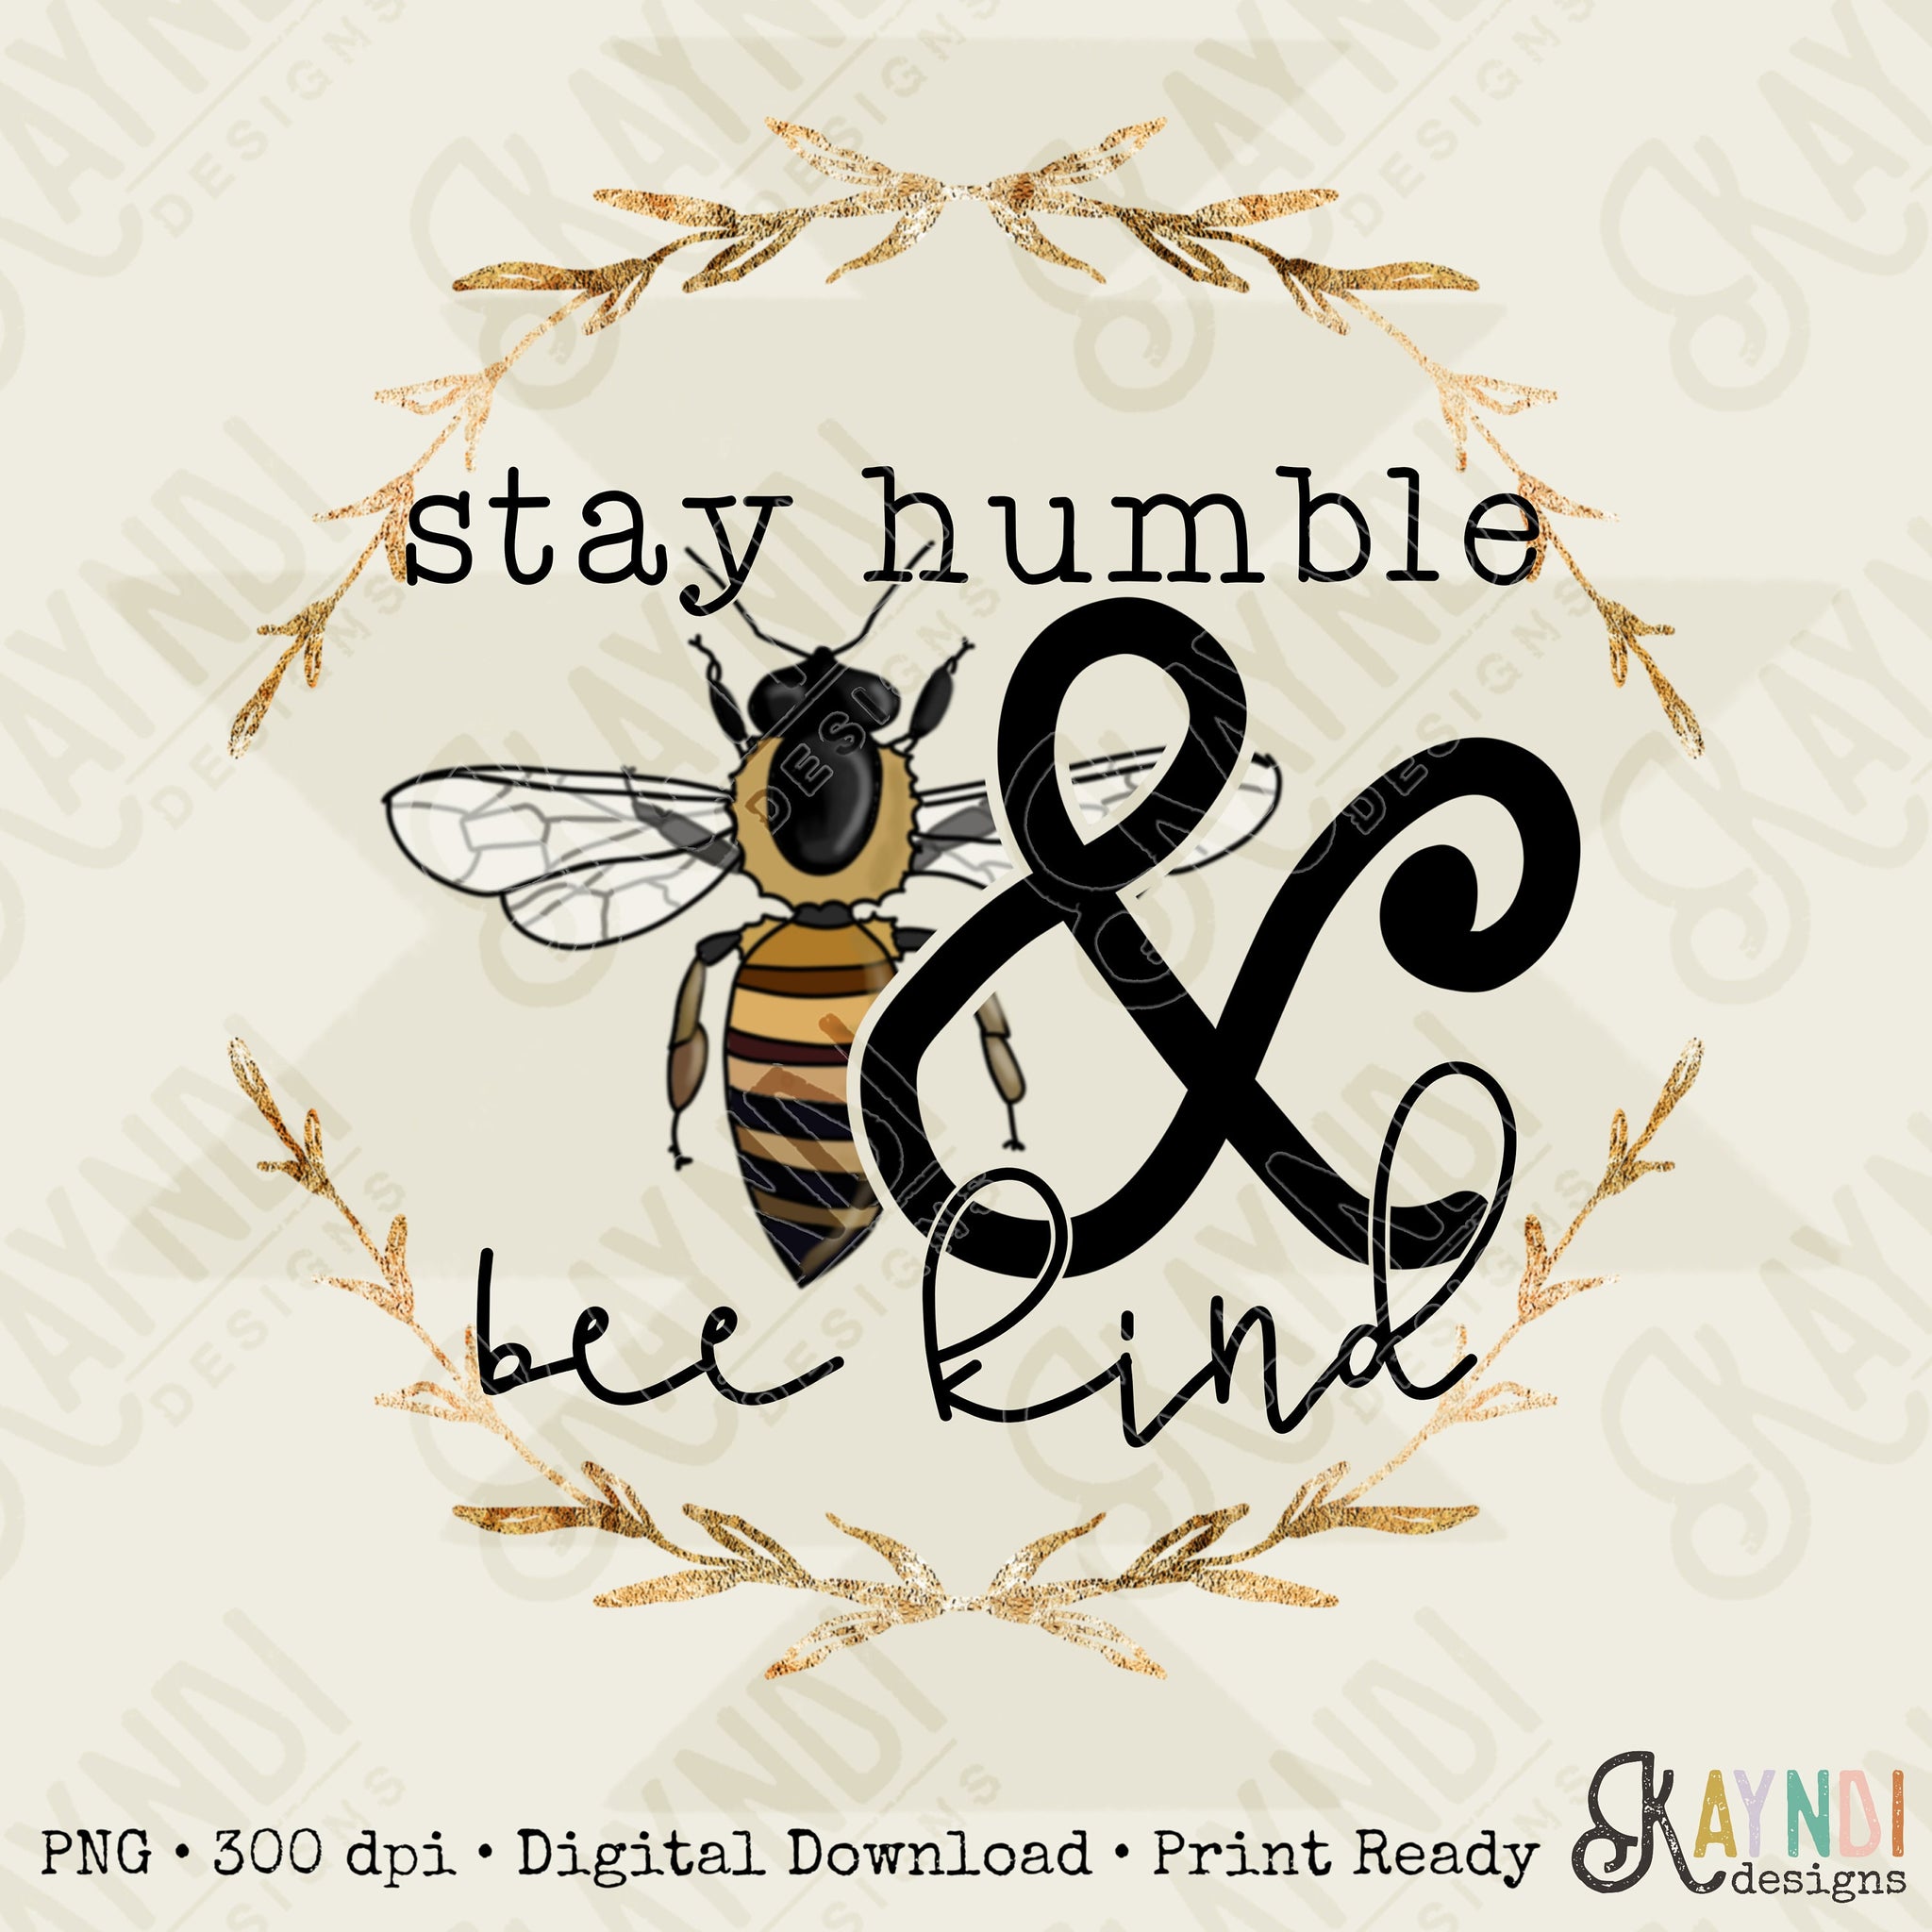 Stay Humble and Be Kind Bumble Bee Sublimation Design PNG Digital Download Printable Gold Foil Leaf Antique Vintage Queen Bee bumblebee